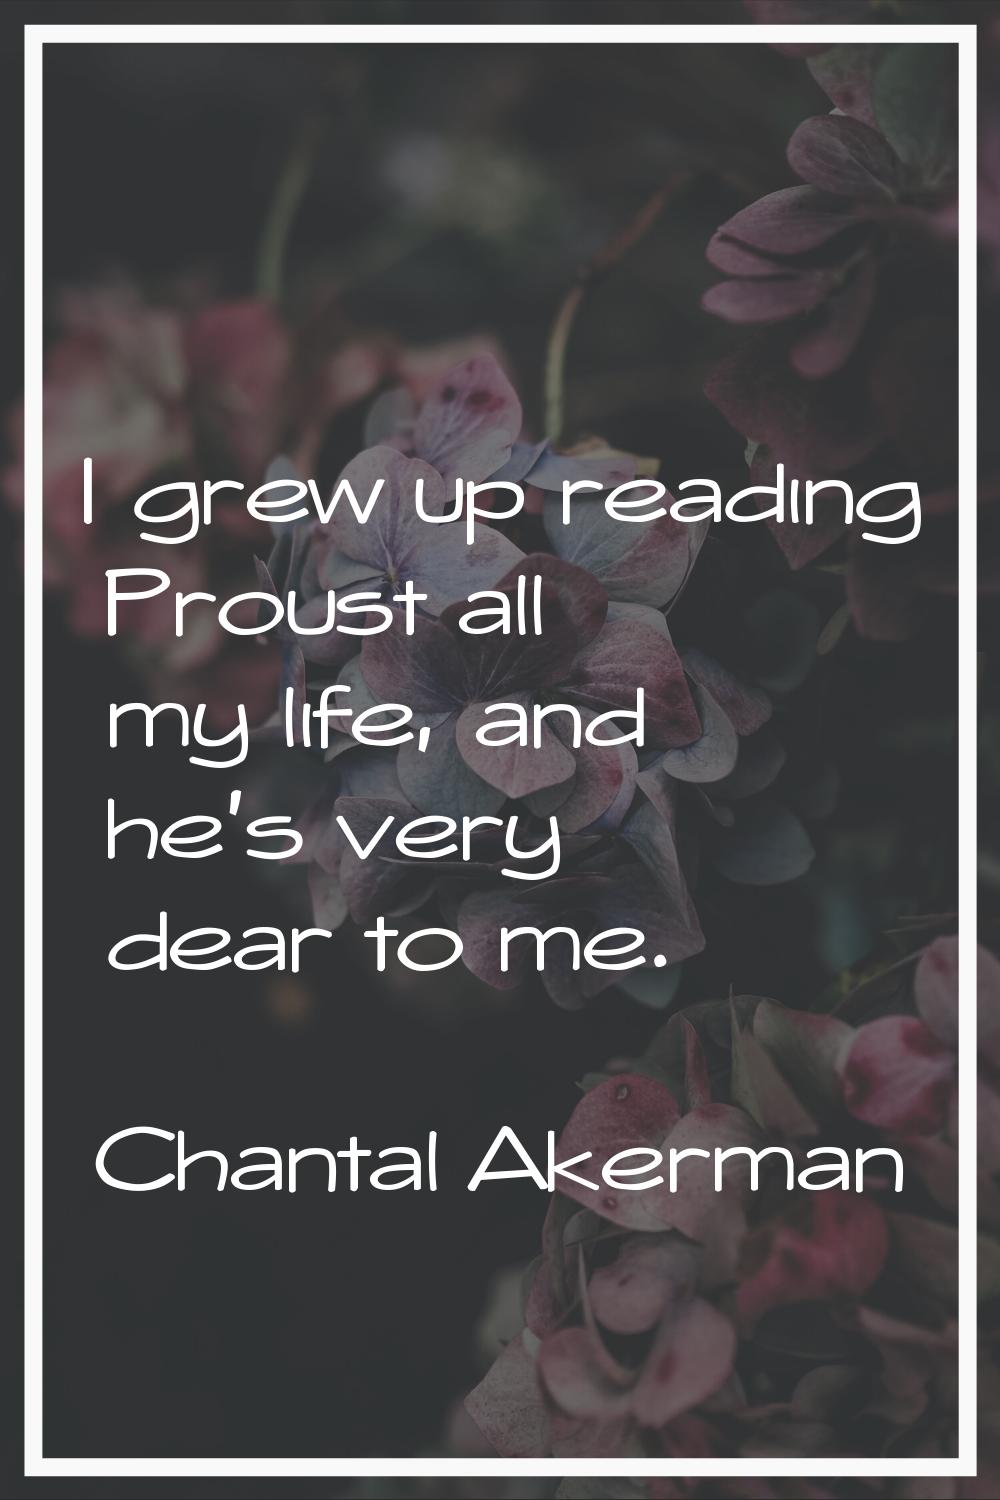 I grew up reading Proust all my life, and he's very dear to me.